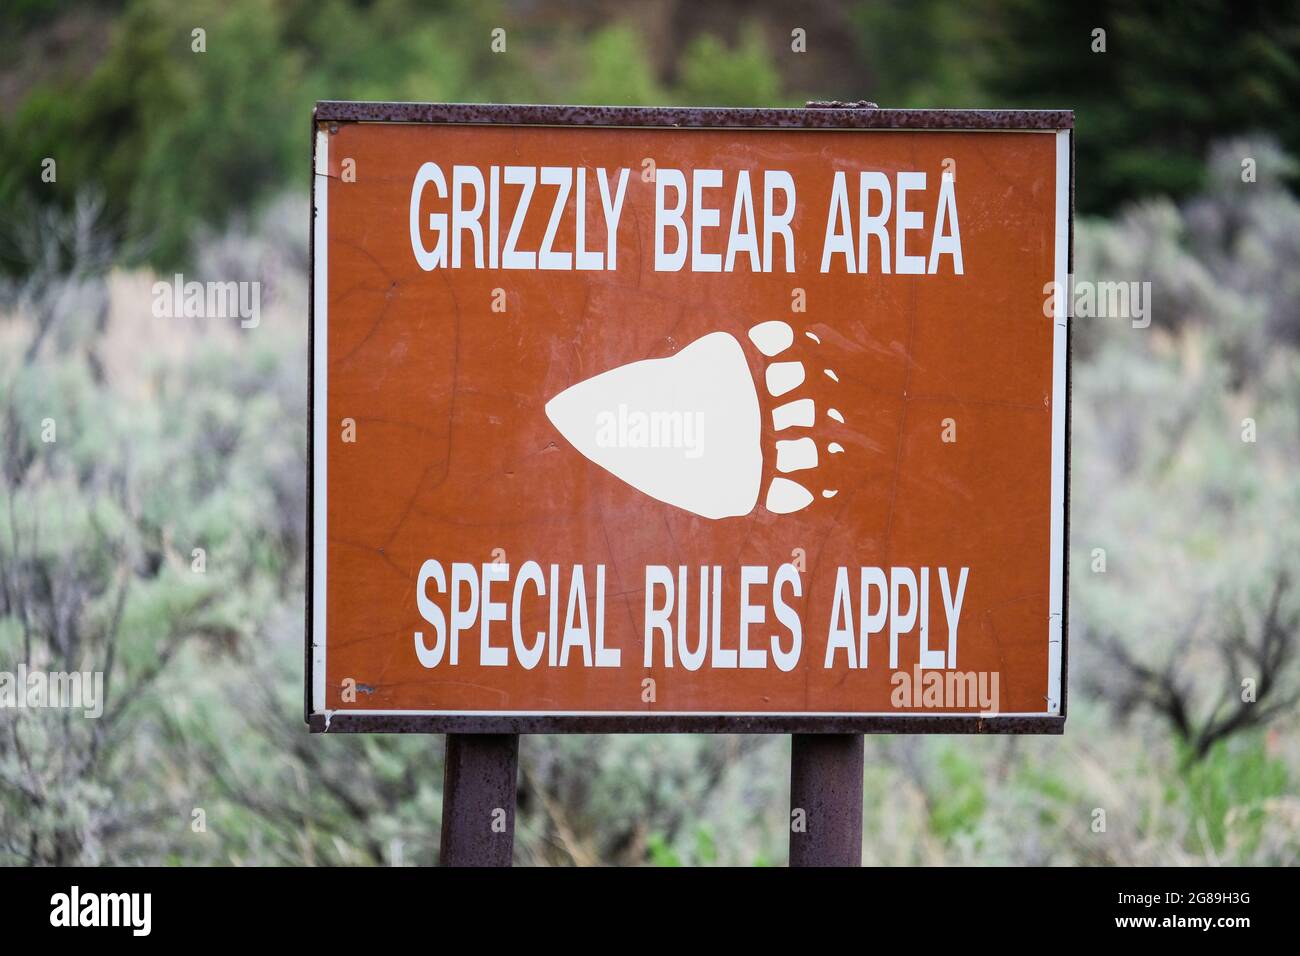 Grizzly Bear warning sign, Shoshone National Forest, Wyoming, USA, just outside Yellowstone National Park. Stock Photo